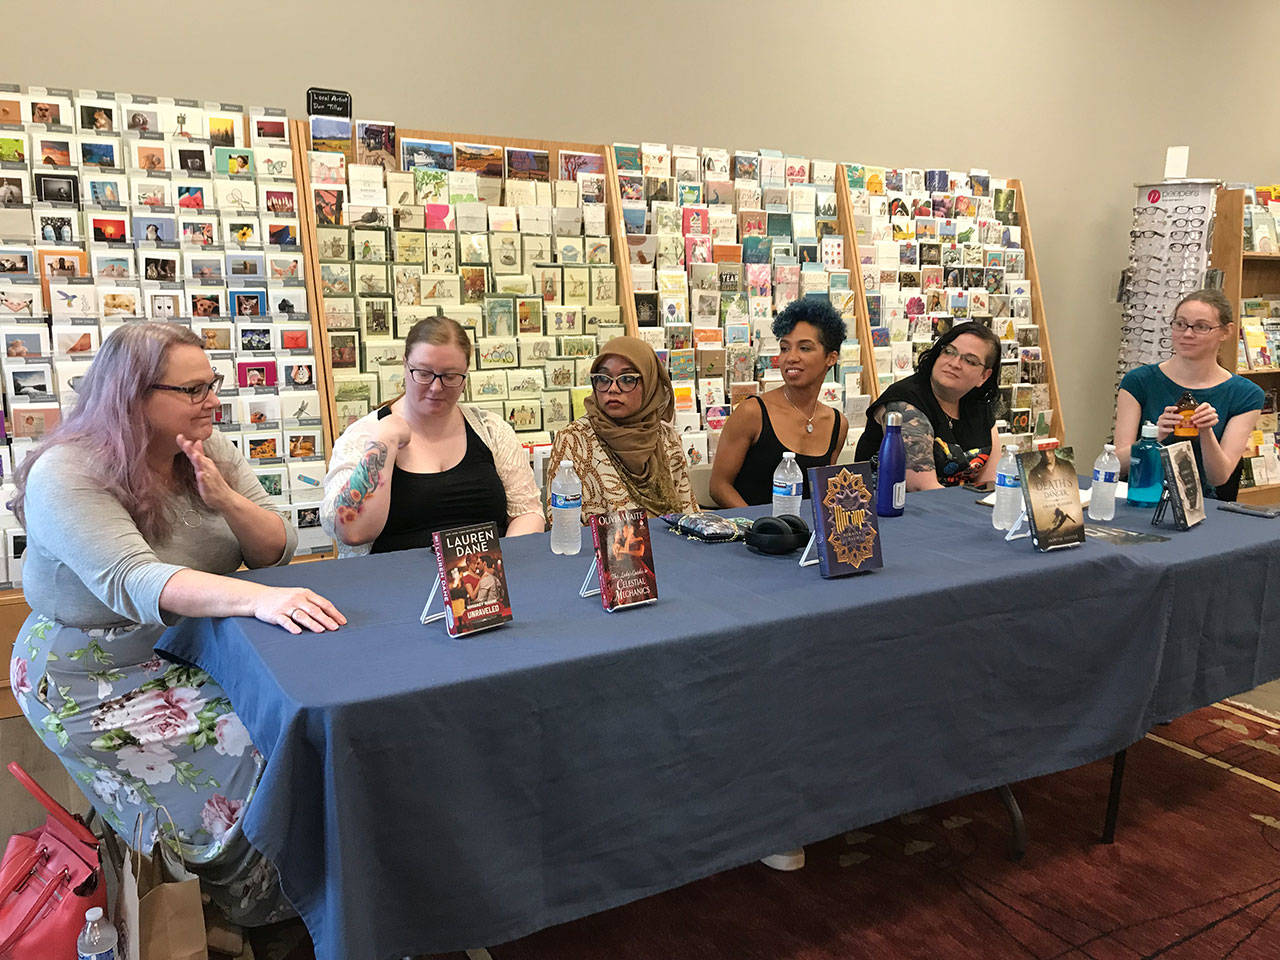 Photo by Samantha Pak/staff photo                                Authors, from left, Lauren Dane, Olivia Waite, Somaiya Daud, Jasmine Silvera and A.J. Hackwith and moderator Casey Blair discuss reclaiming history at Brick & Mortar Books in Redmond.